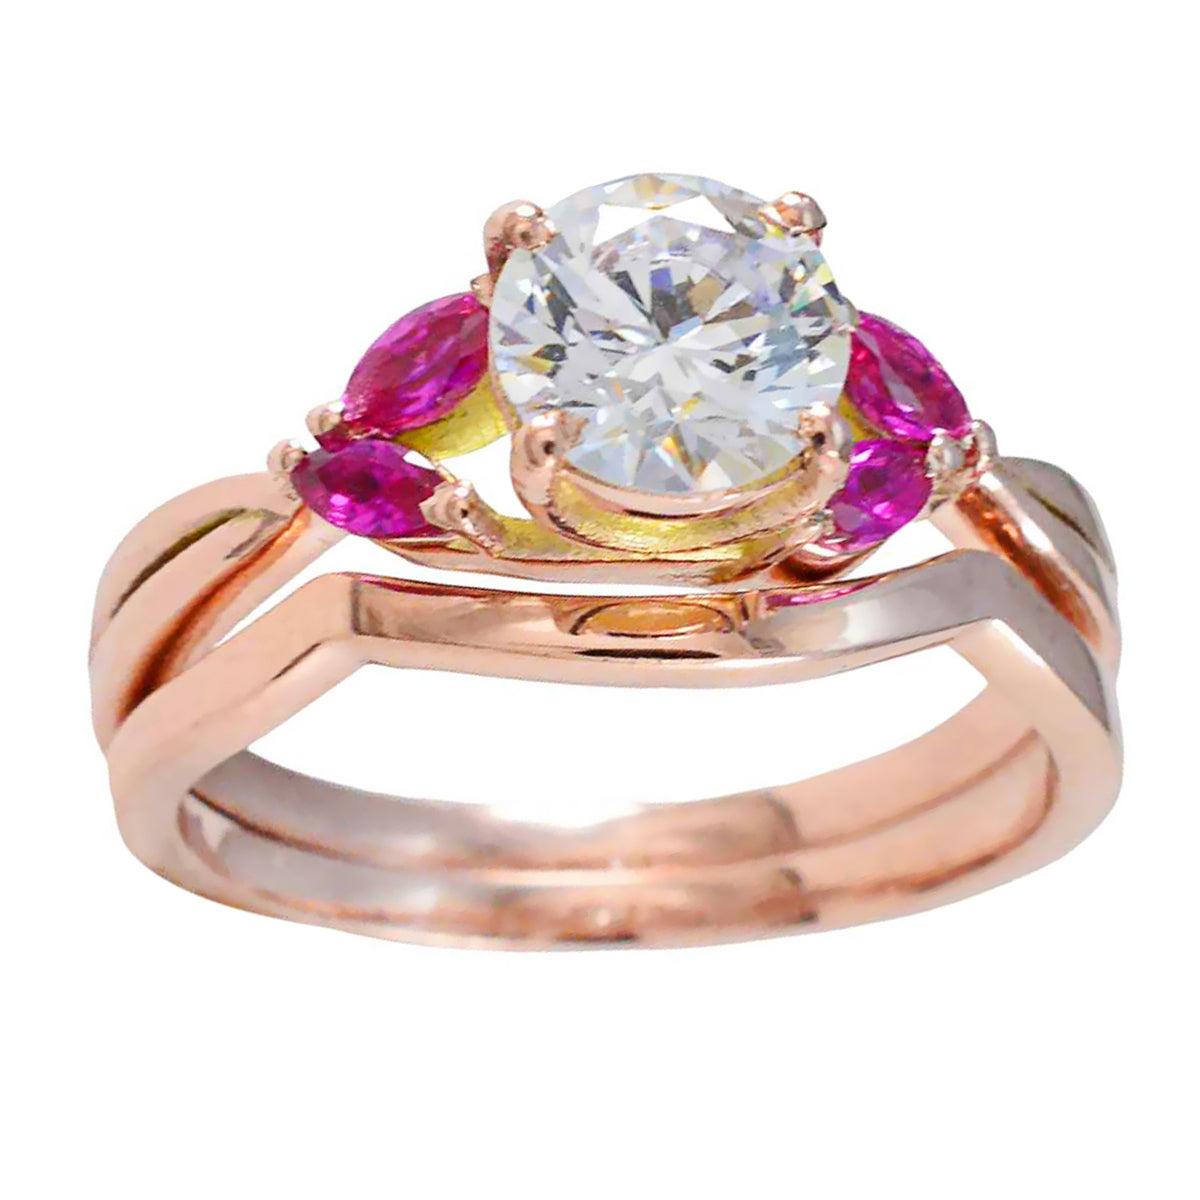 Riyo Prime Silver Ring With Rose Gold Plating Ruby CZ Stone Round Shape Prong Setting Fashion Jewelry Christmas Ring